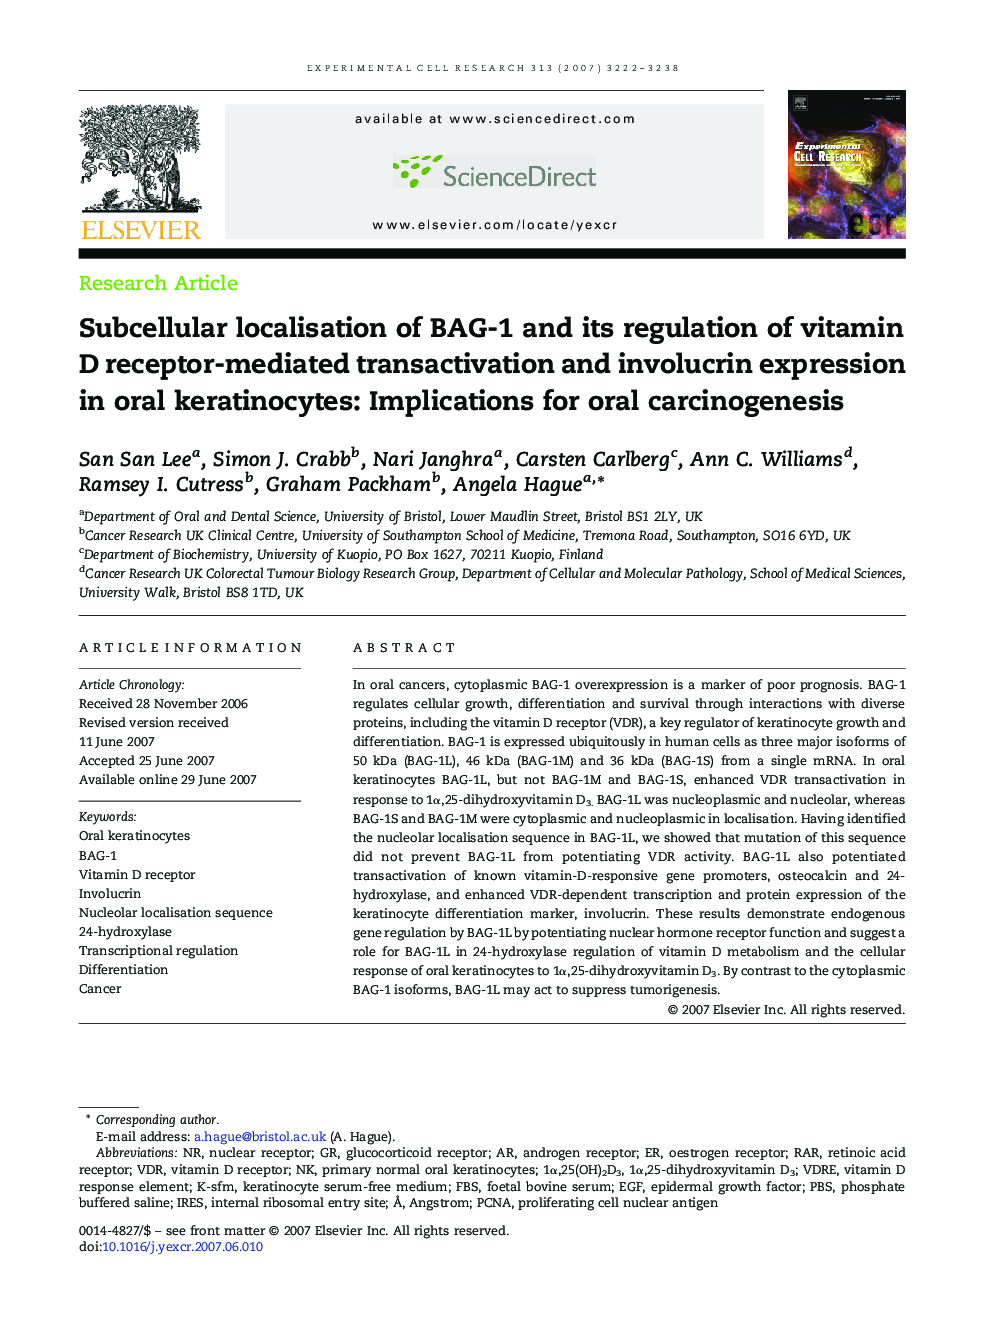 Subcellular localisation of BAG-1 and its regulation of vitamin D receptor-mediated transactivation and involucrin expression in oral keratinocytes: Implications for oral carcinogenesis